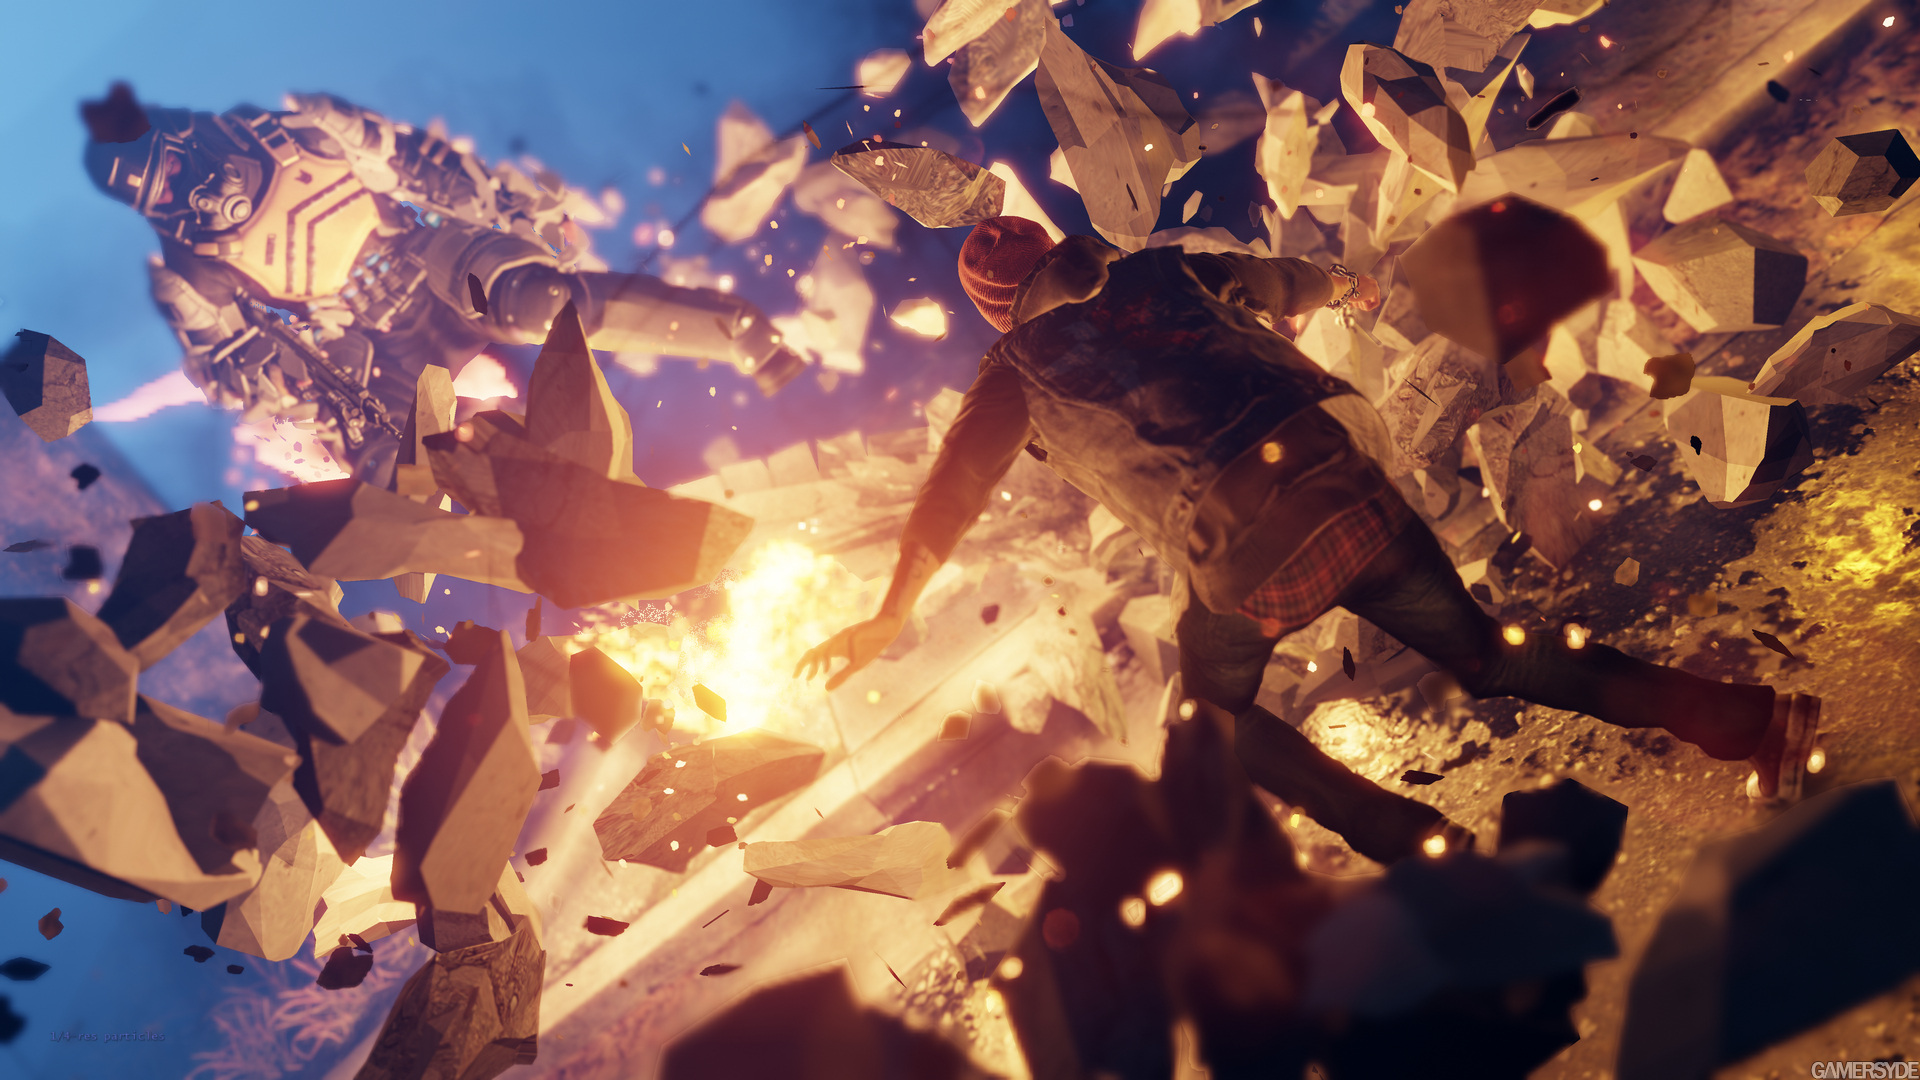 image_infamous_second_son-22309-2661_0008.jpg